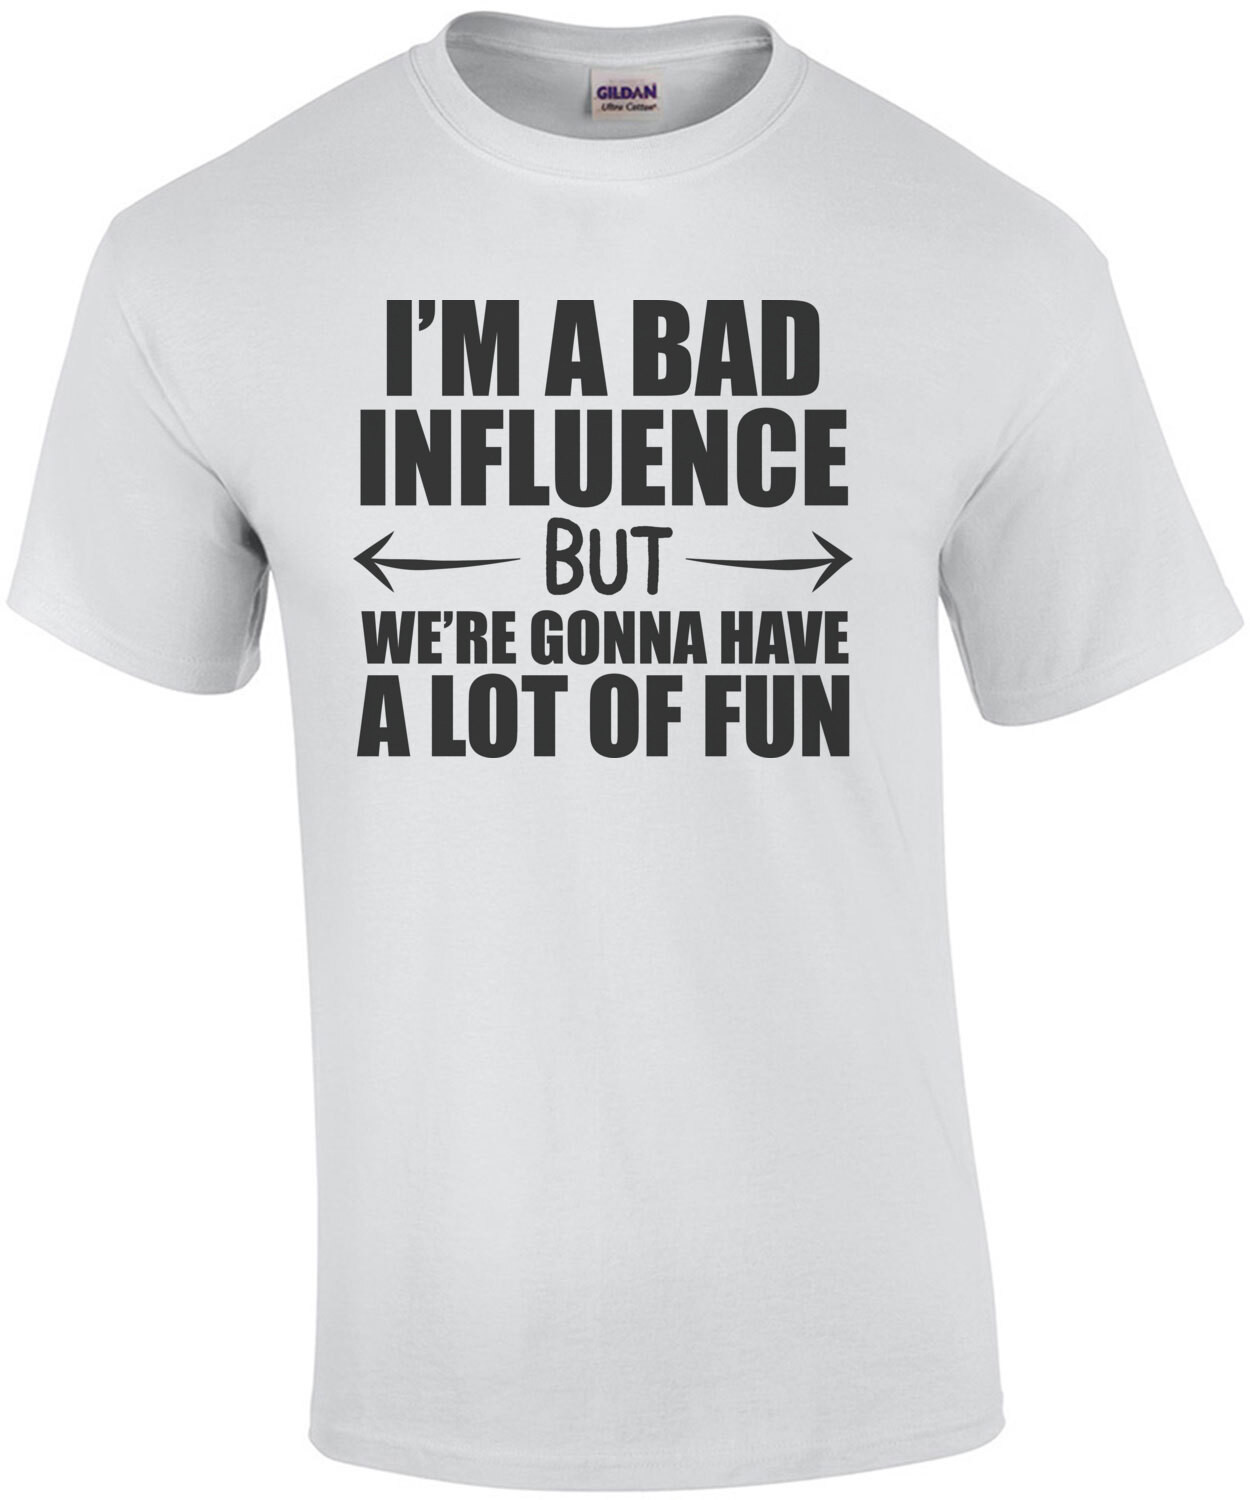 I'm a bad influence but we're gonna have a lot of fun - funny t-shirt